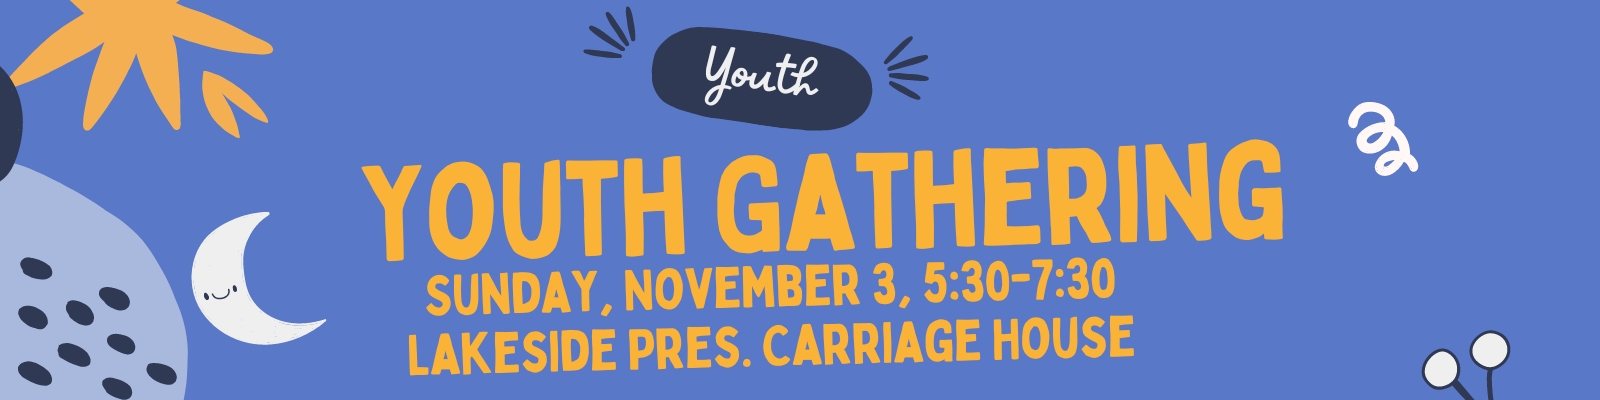 February 18 Youth Gathering Banner